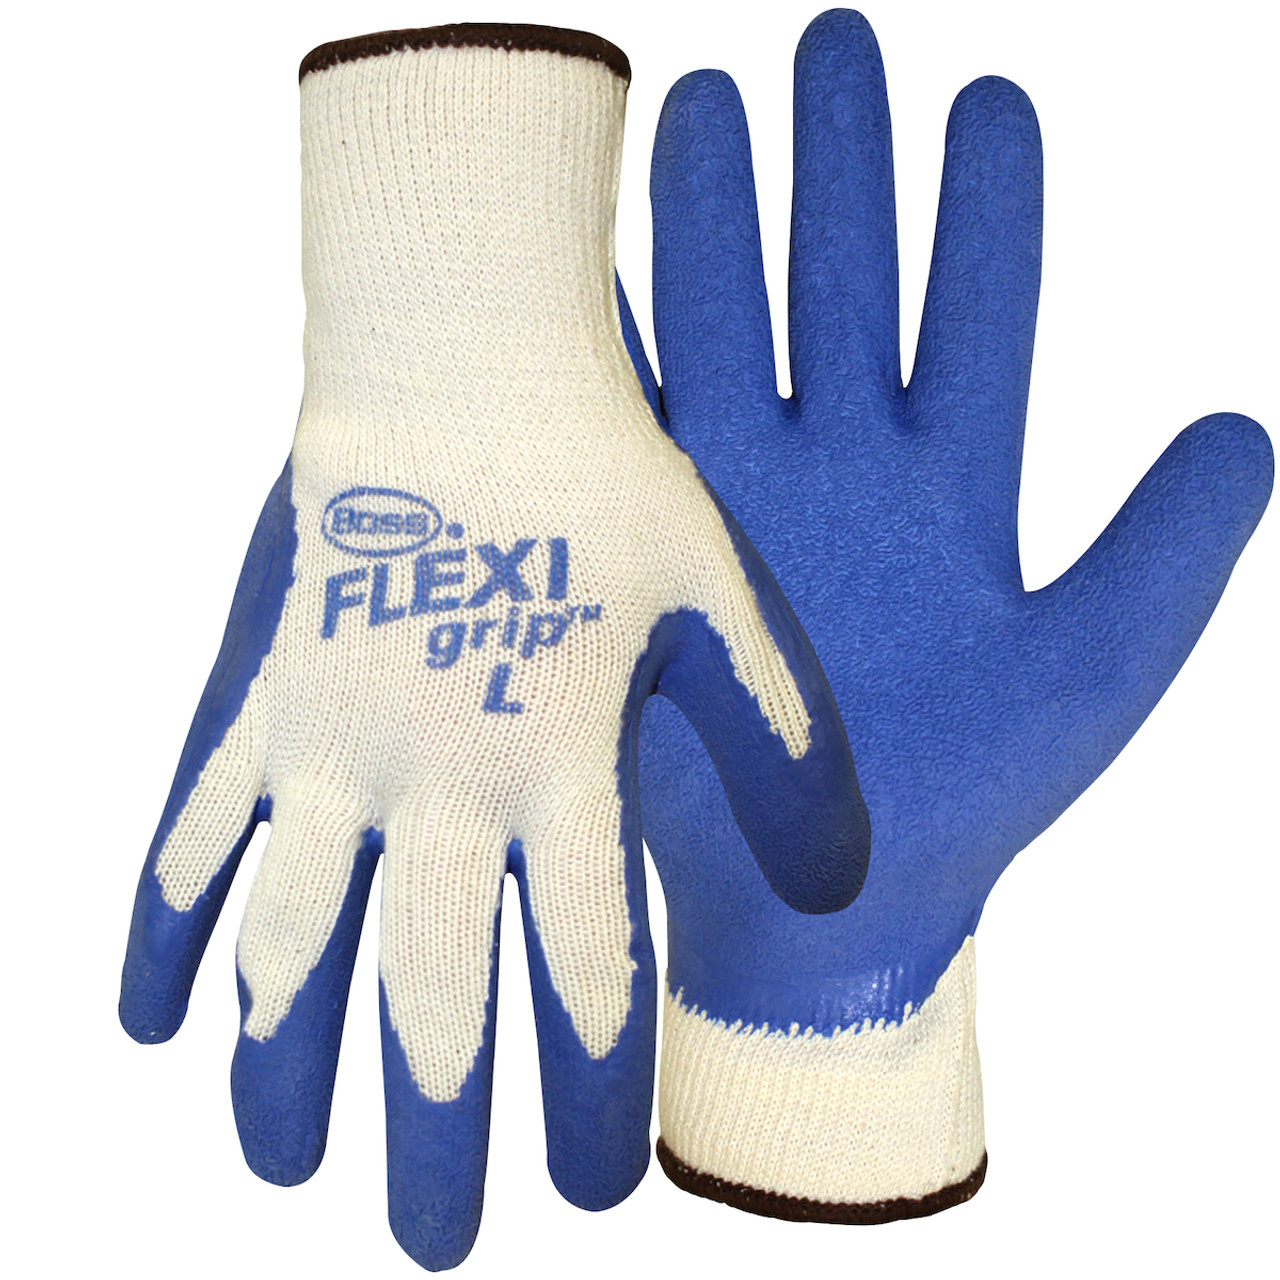 BOSS FLEXI GRIP CRINKLED BLUE LATEX PALM WITH COLOR CODED - Size M, Light Gray 1 Pair - Latex Coated Seamless Knits - First Industrial Supplies